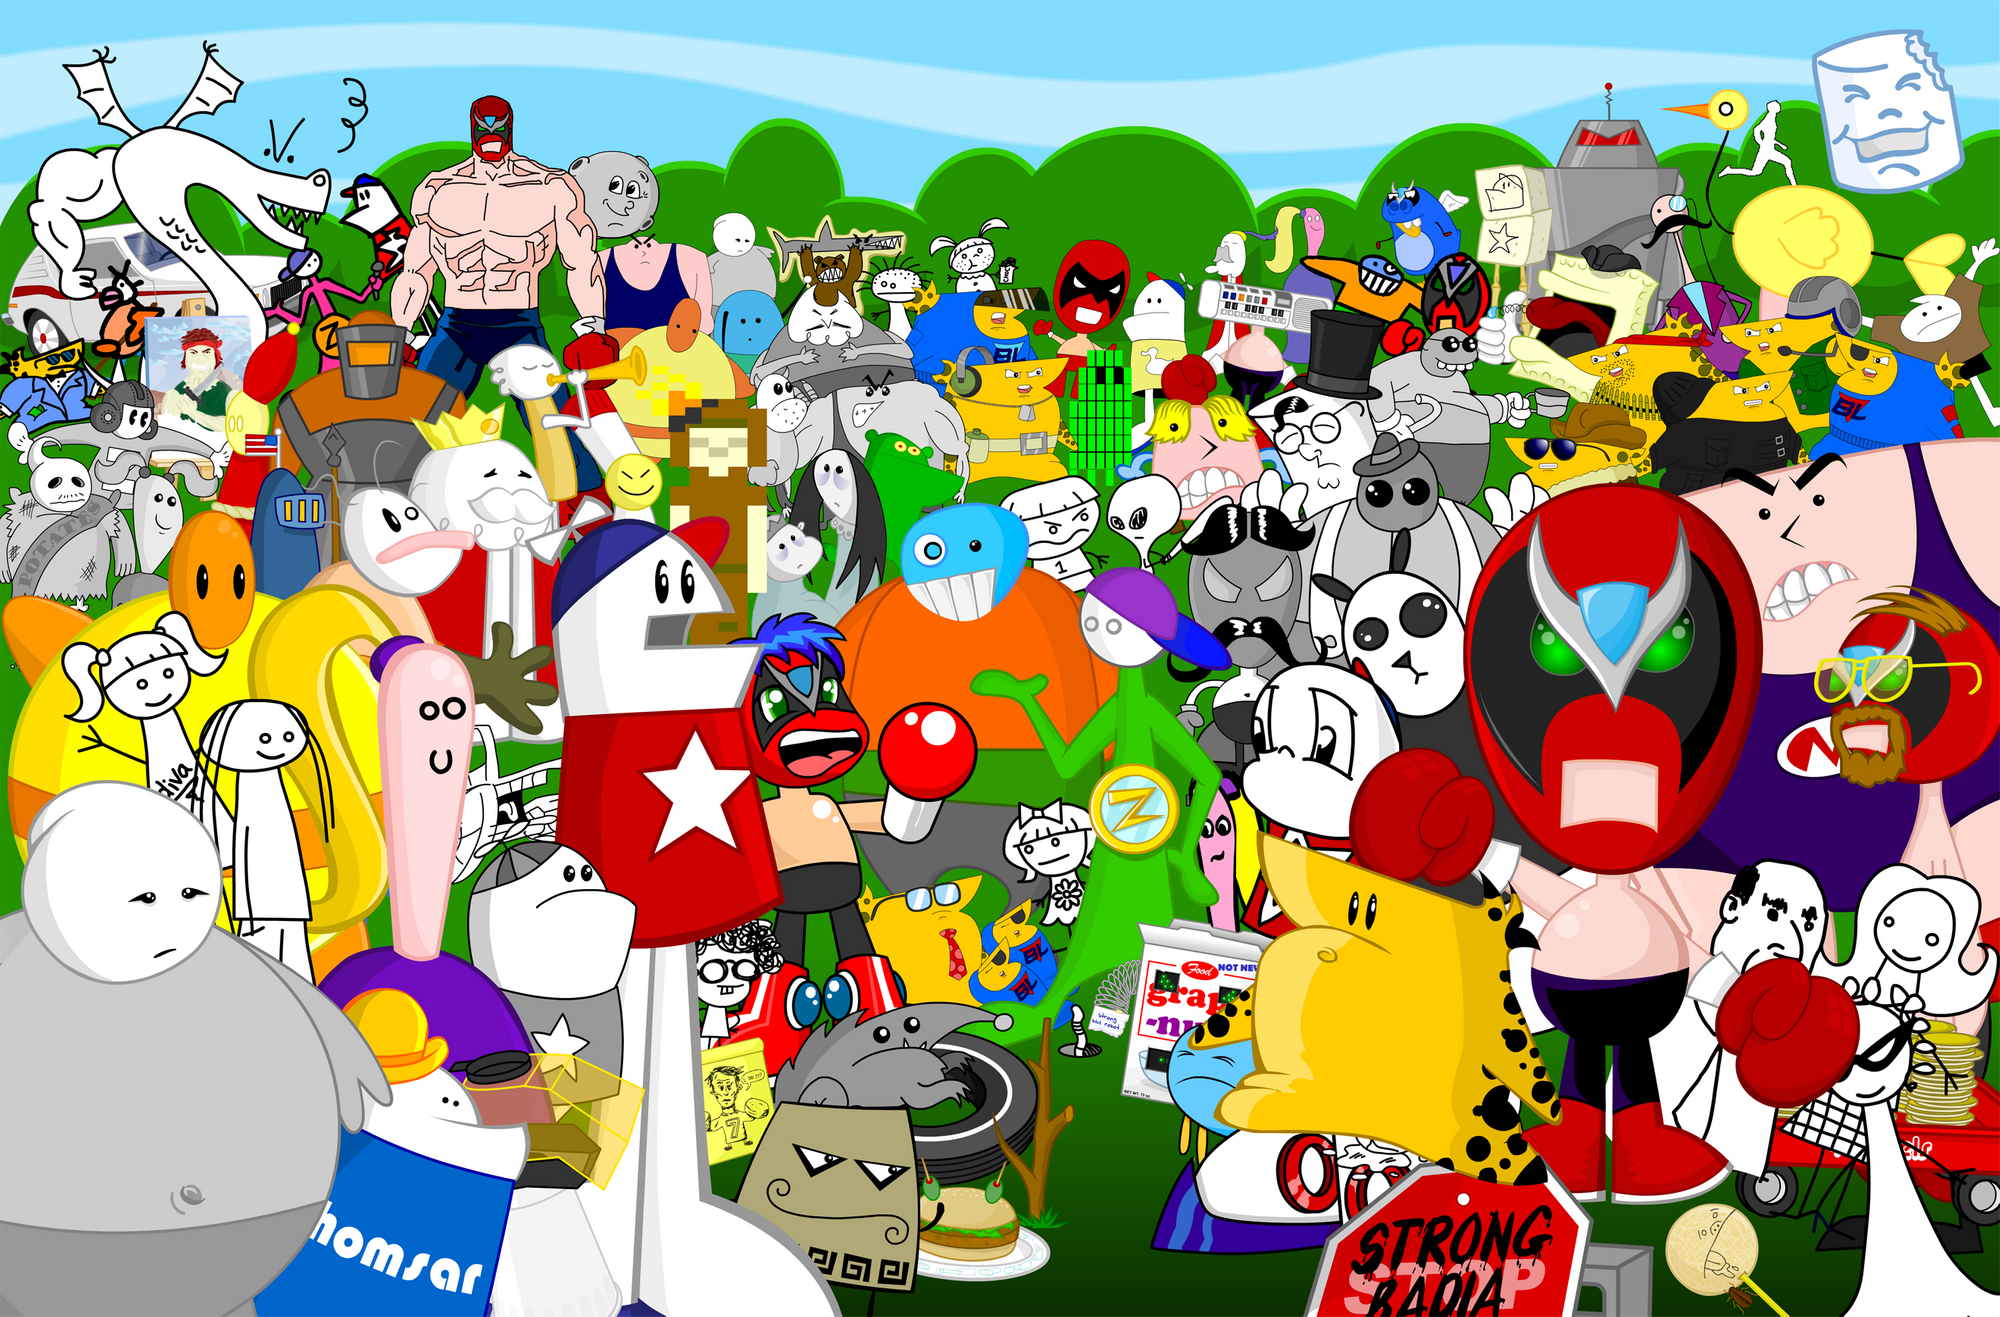 Homestar Runner, the Pre-Internet Era, and a Yearning for Simplicity